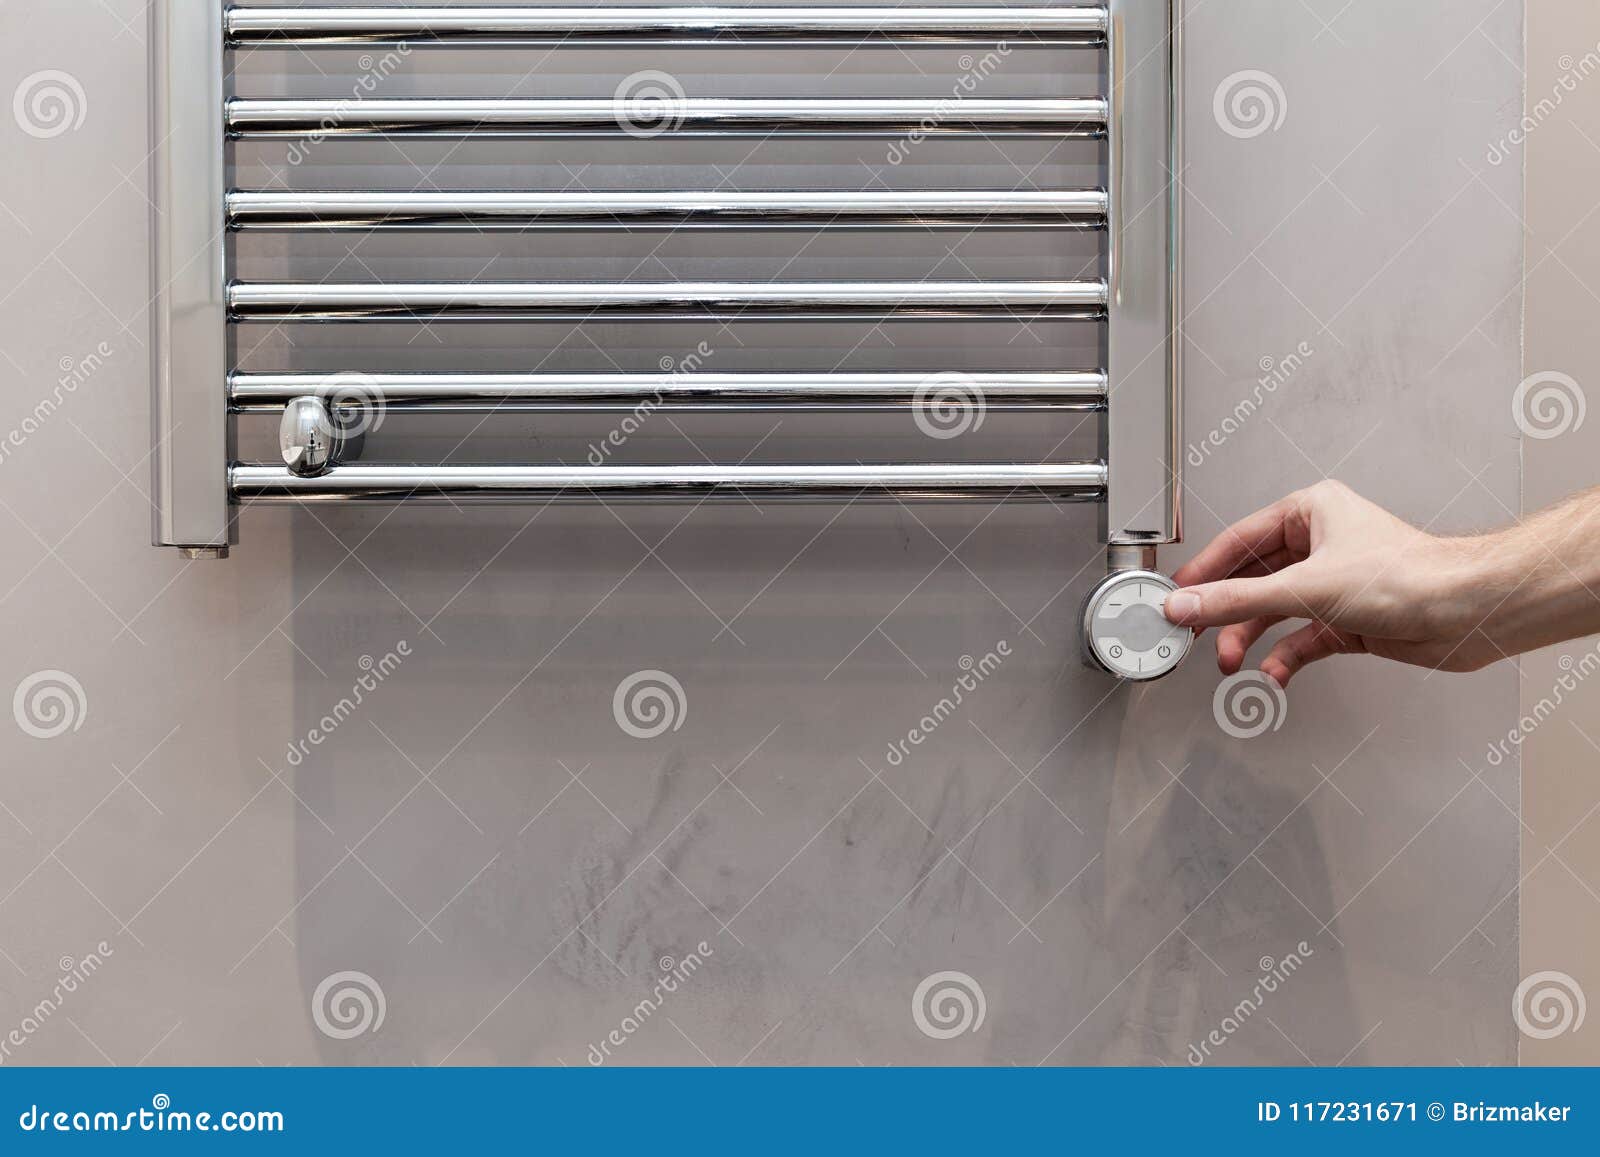 the man hand regulates the temperature in the heated towel rail in bathroom.